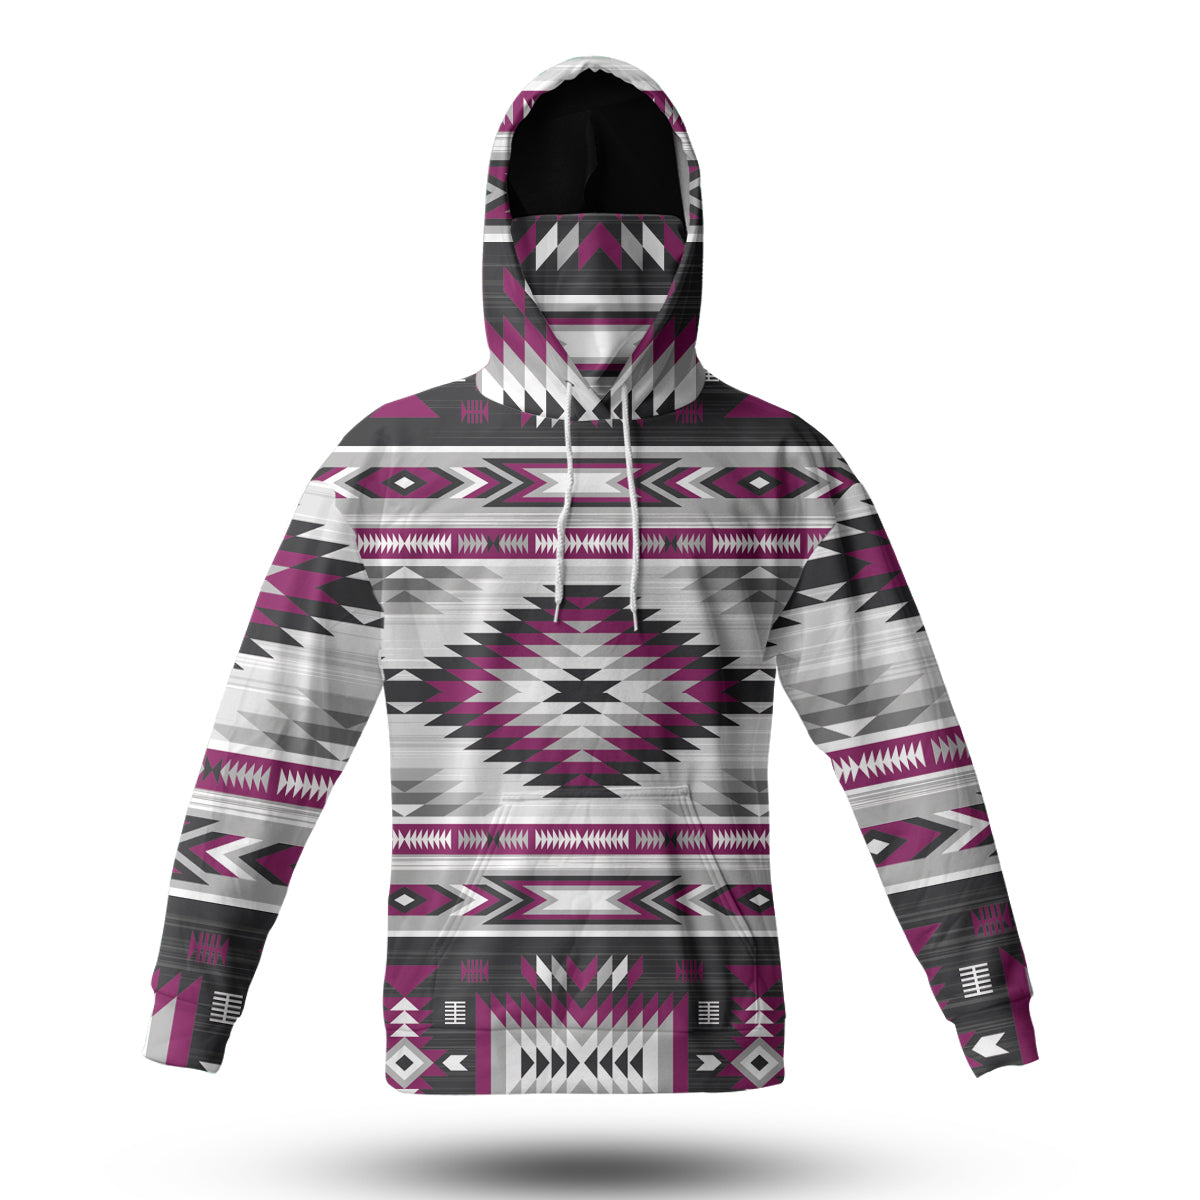 Powwow StoreHWM0014 Pattern Tribal Native 3D Hoodie With Mask